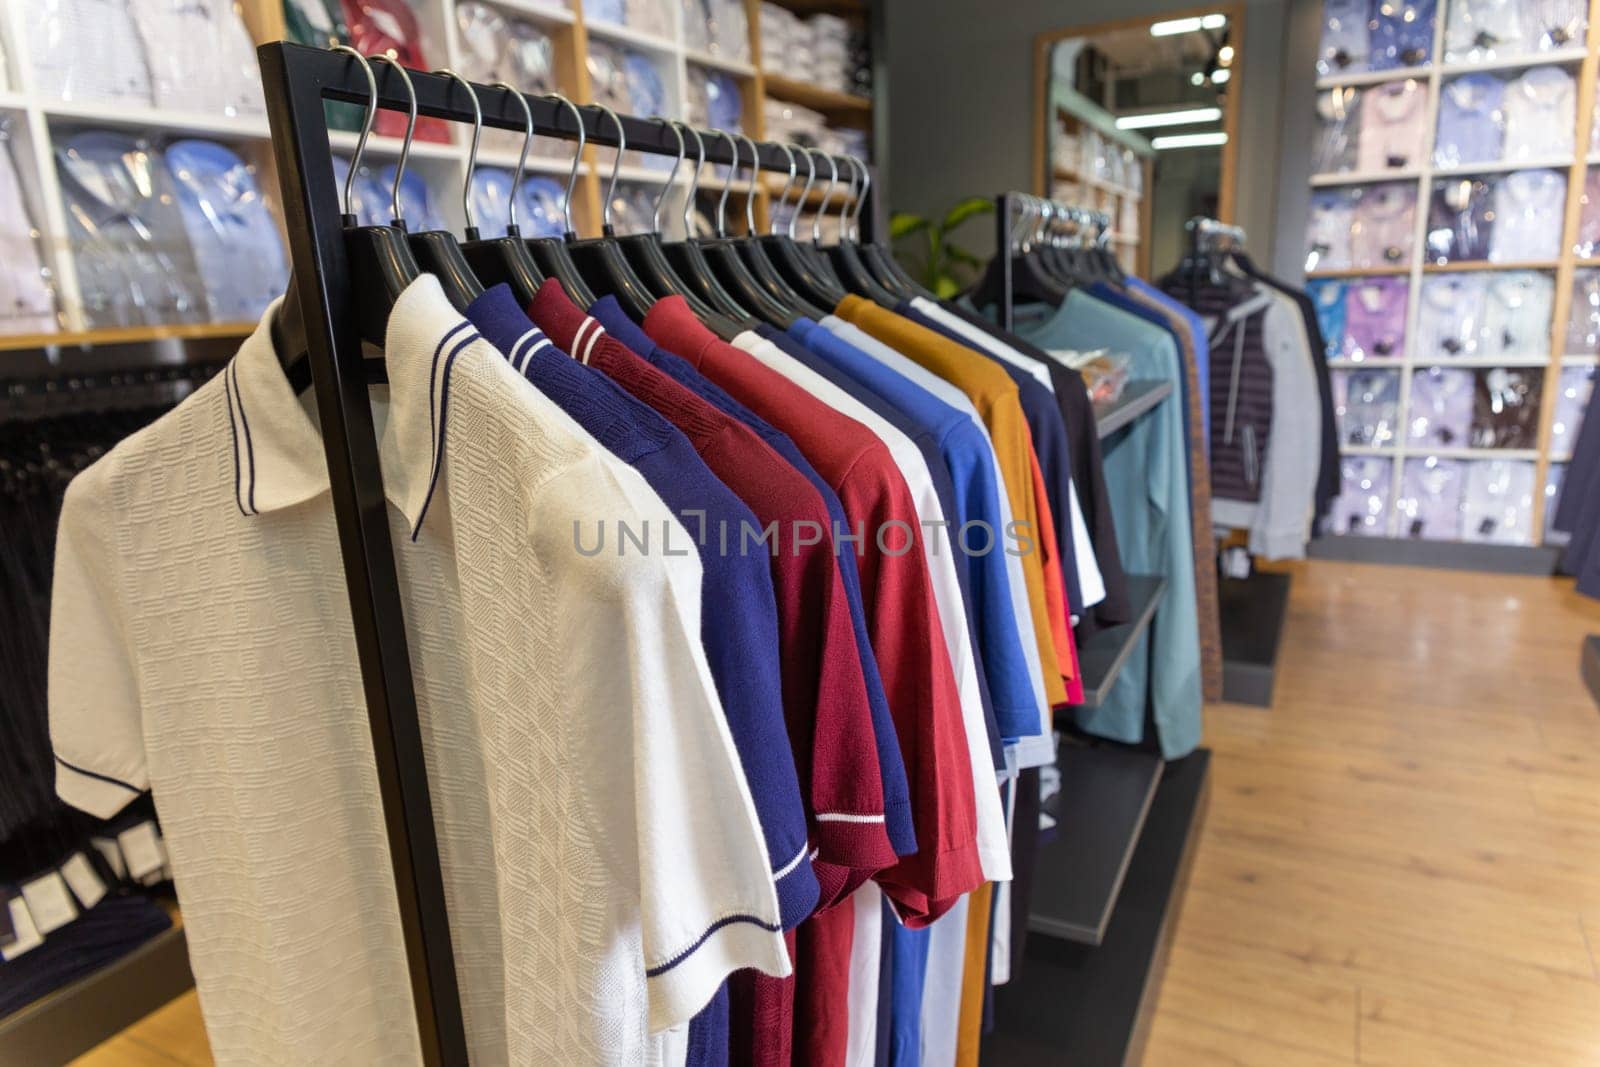 Closed up multicolored mens polo shirts on hangers and shelves in a men's clothing store.